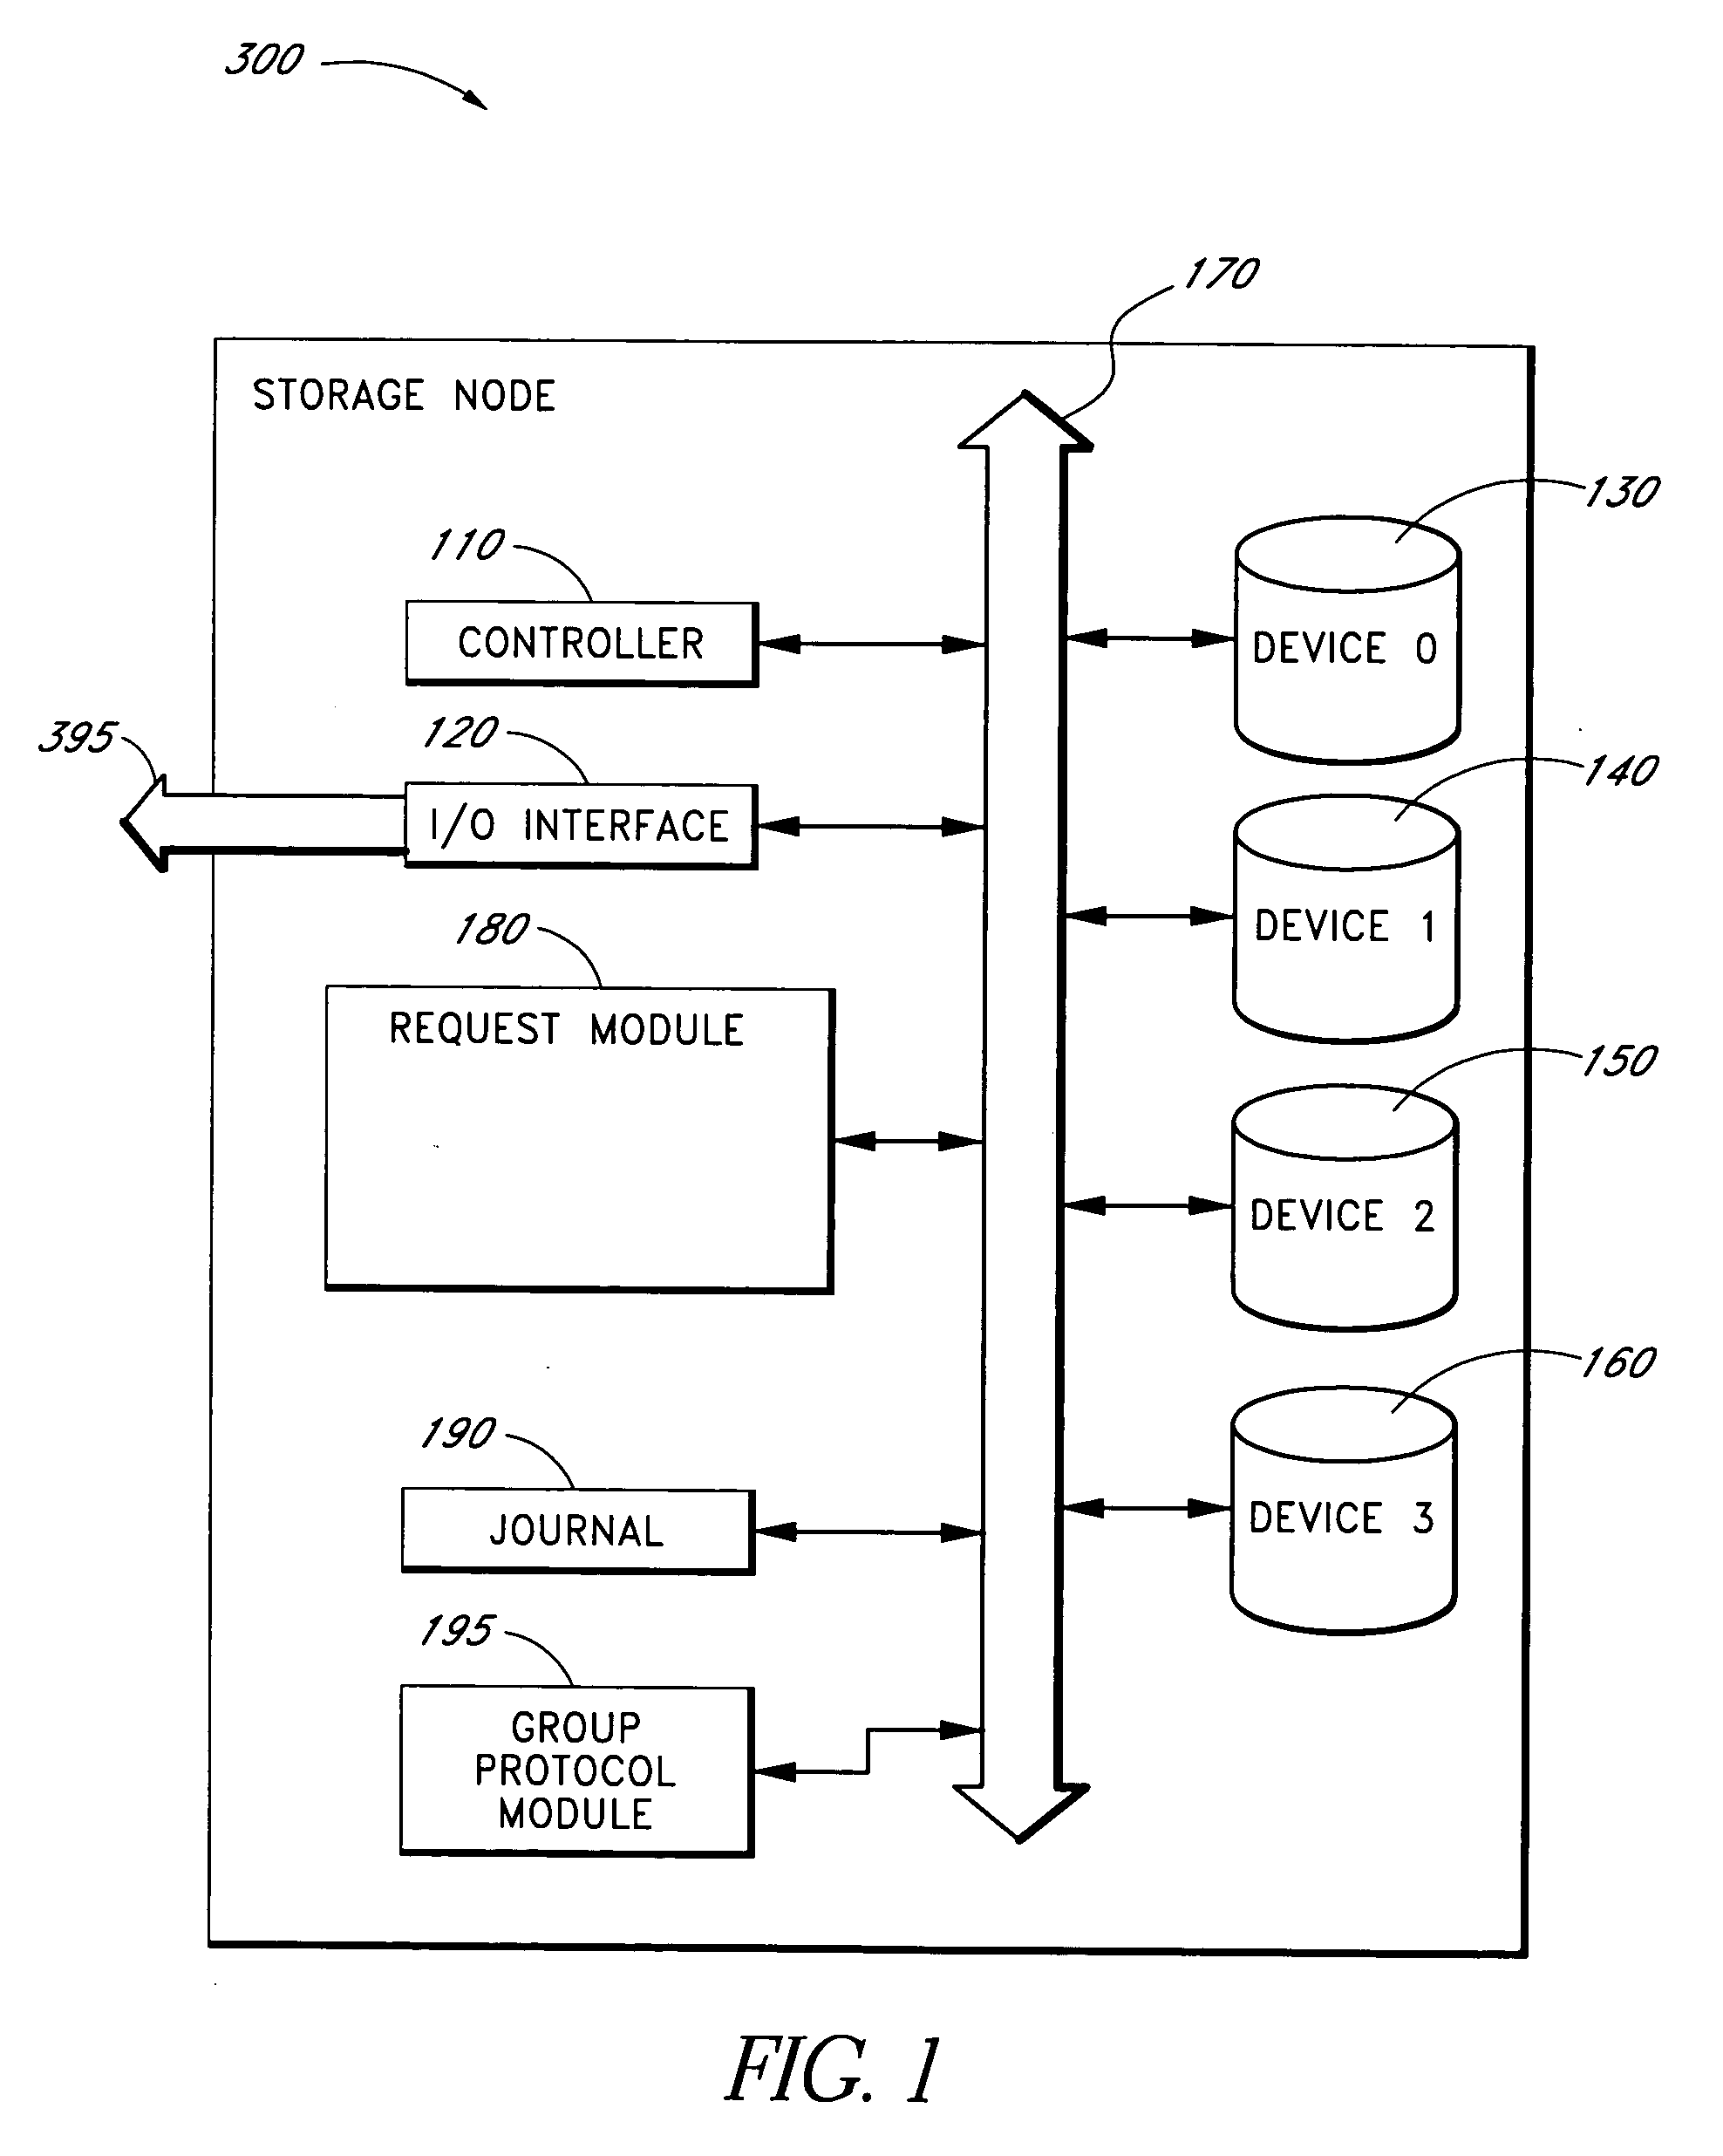 Systems and methods for managing unavailable storage devices